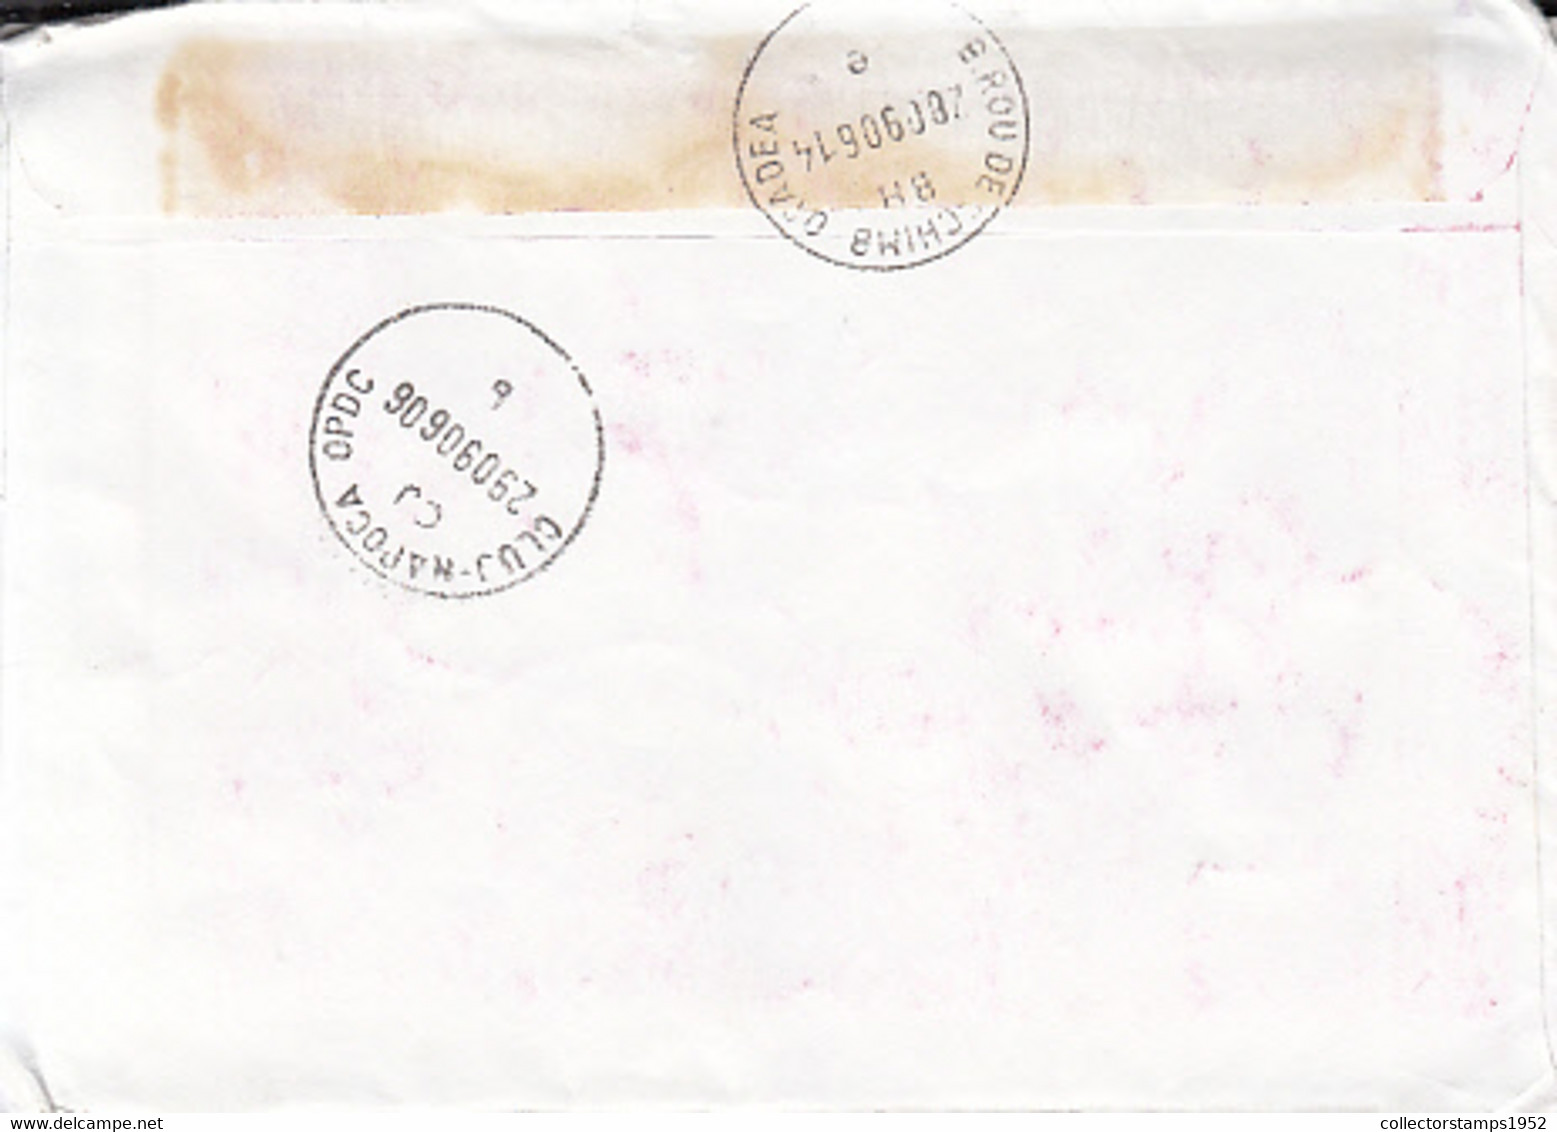 95752- PECS, AMOUNT 740 MACHINE PRINTED STICKER STAMP ON REGISTERED COVER, 2006, HUNGARY - Covers & Documents